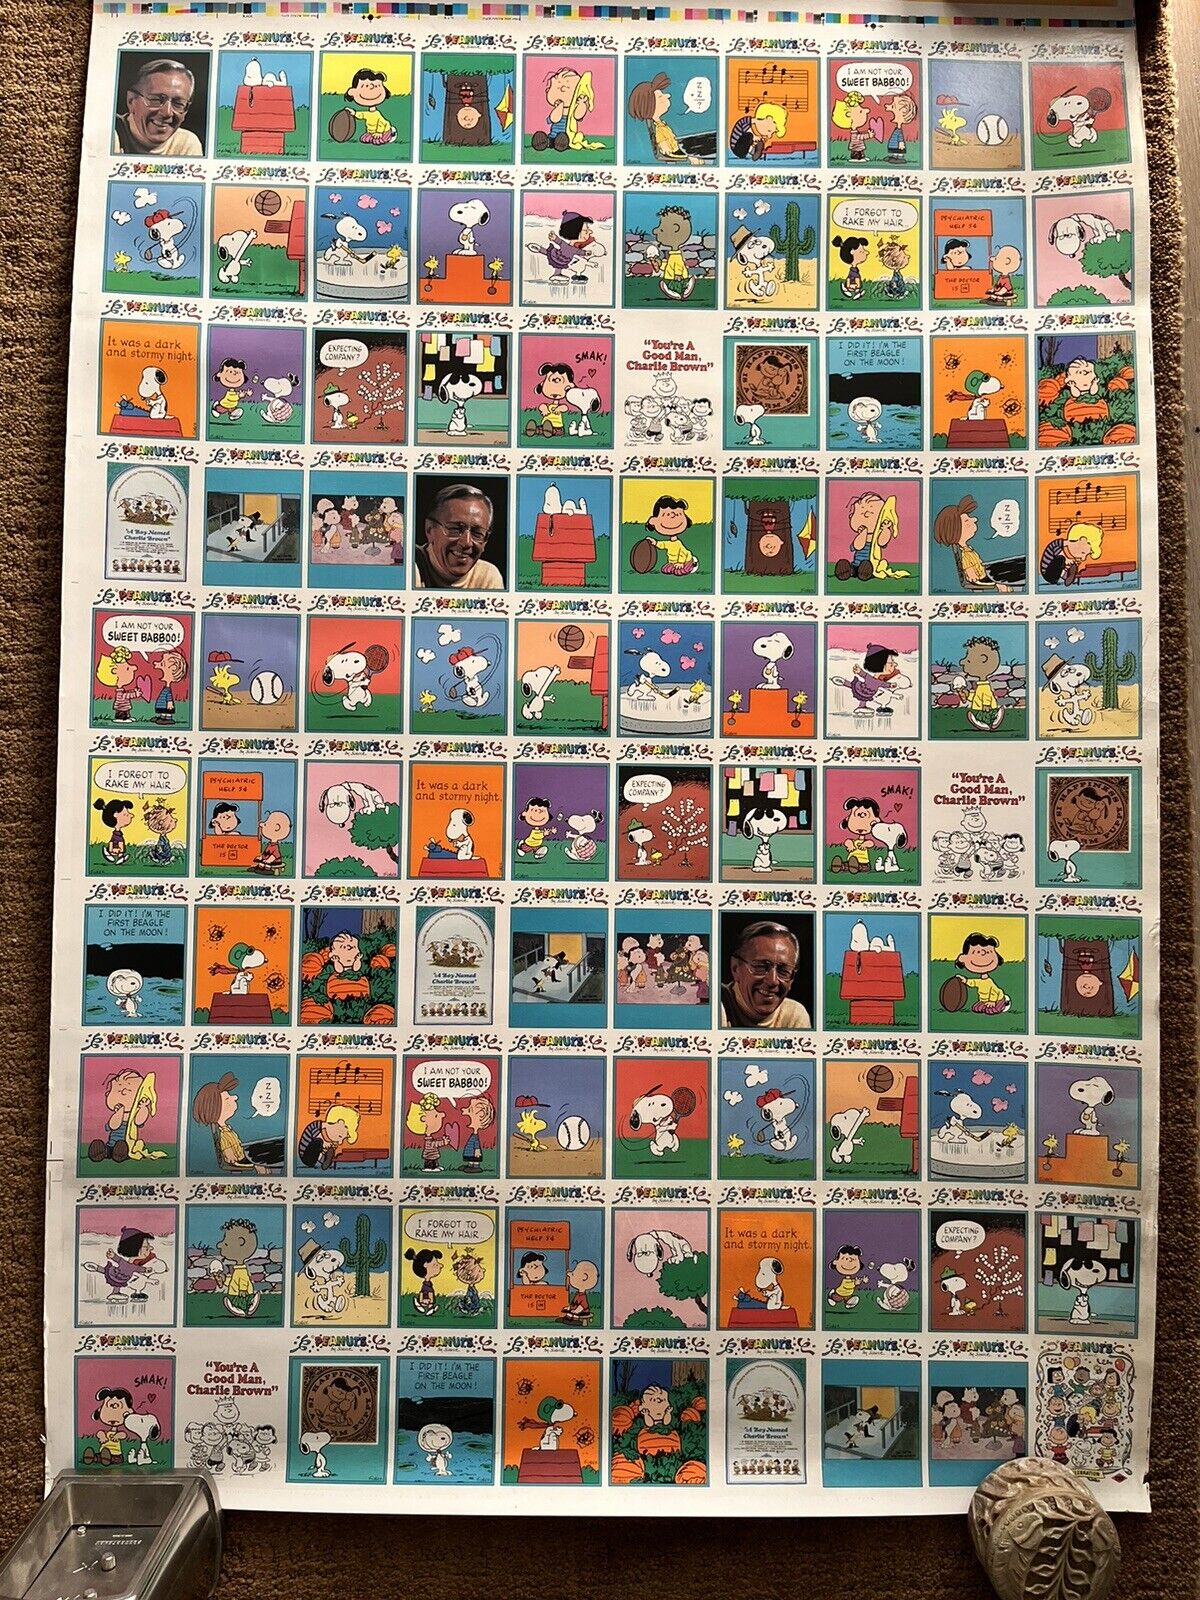 CHARLES SCHULTZ PEANUTS Uncut Sheet of Trading Cards  - Limited Edition